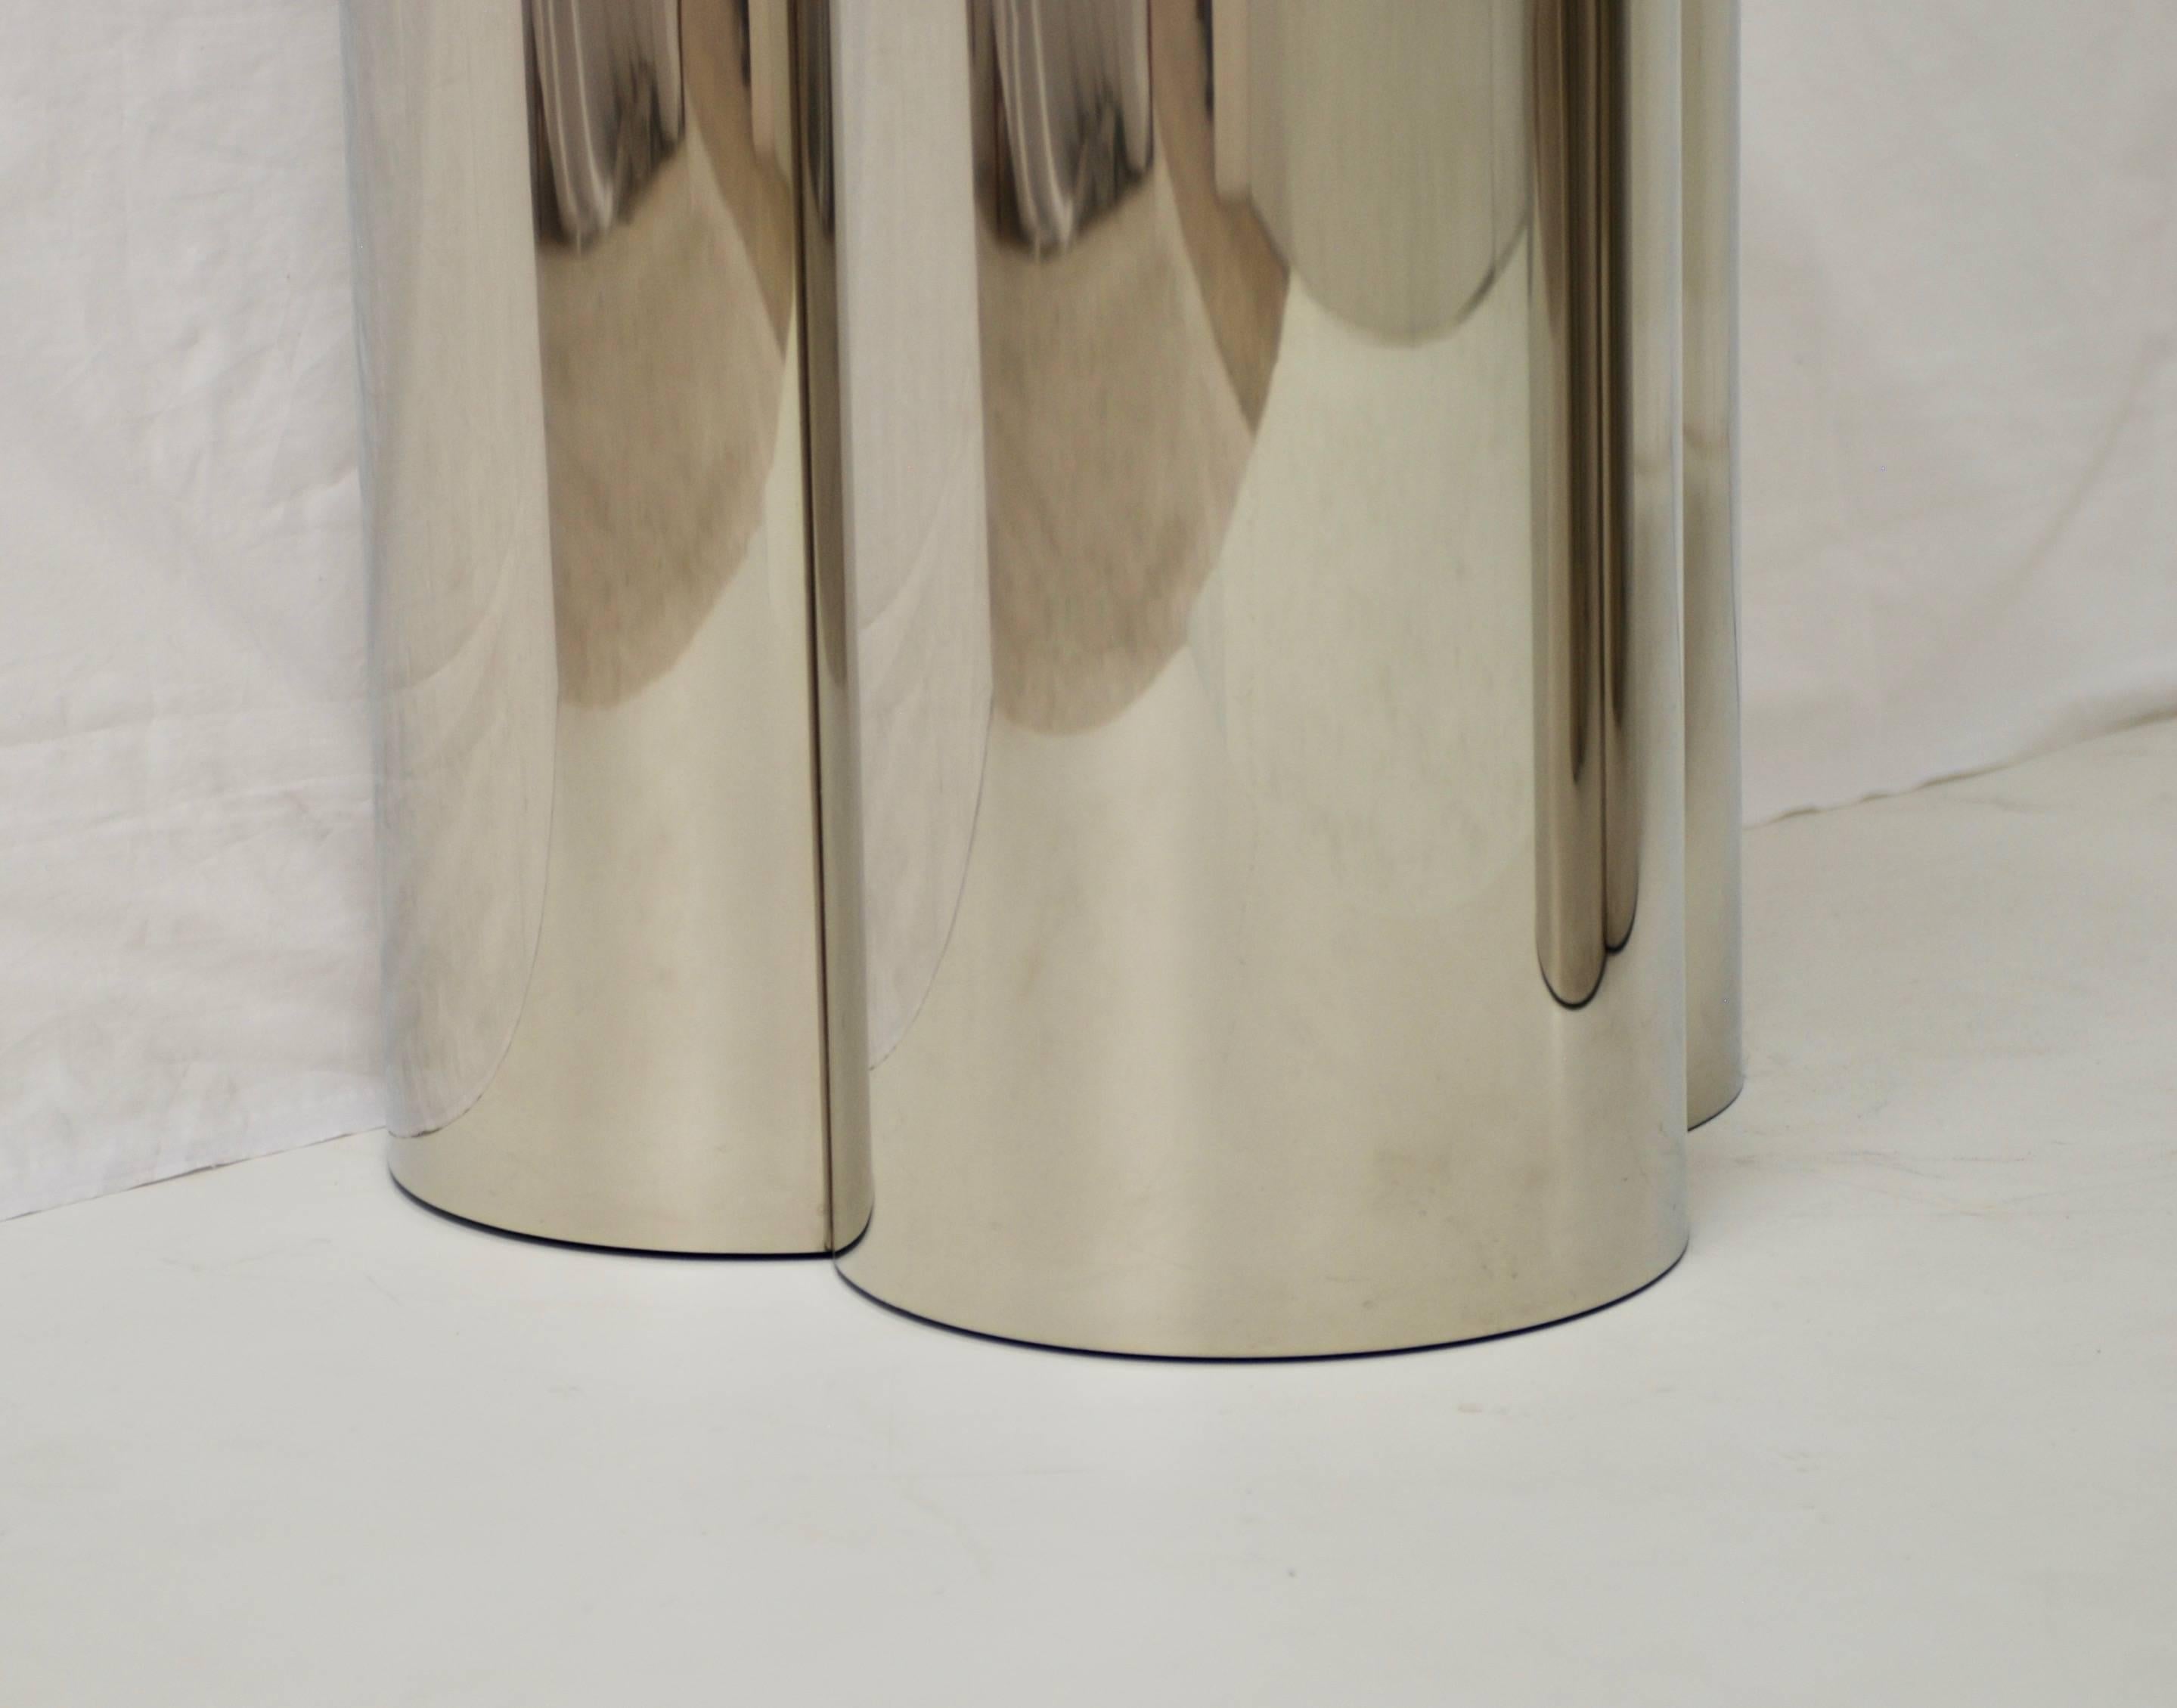 Pair of Chrome Finish Clover Pedestal Table Bases Attributed to C. Jere 5